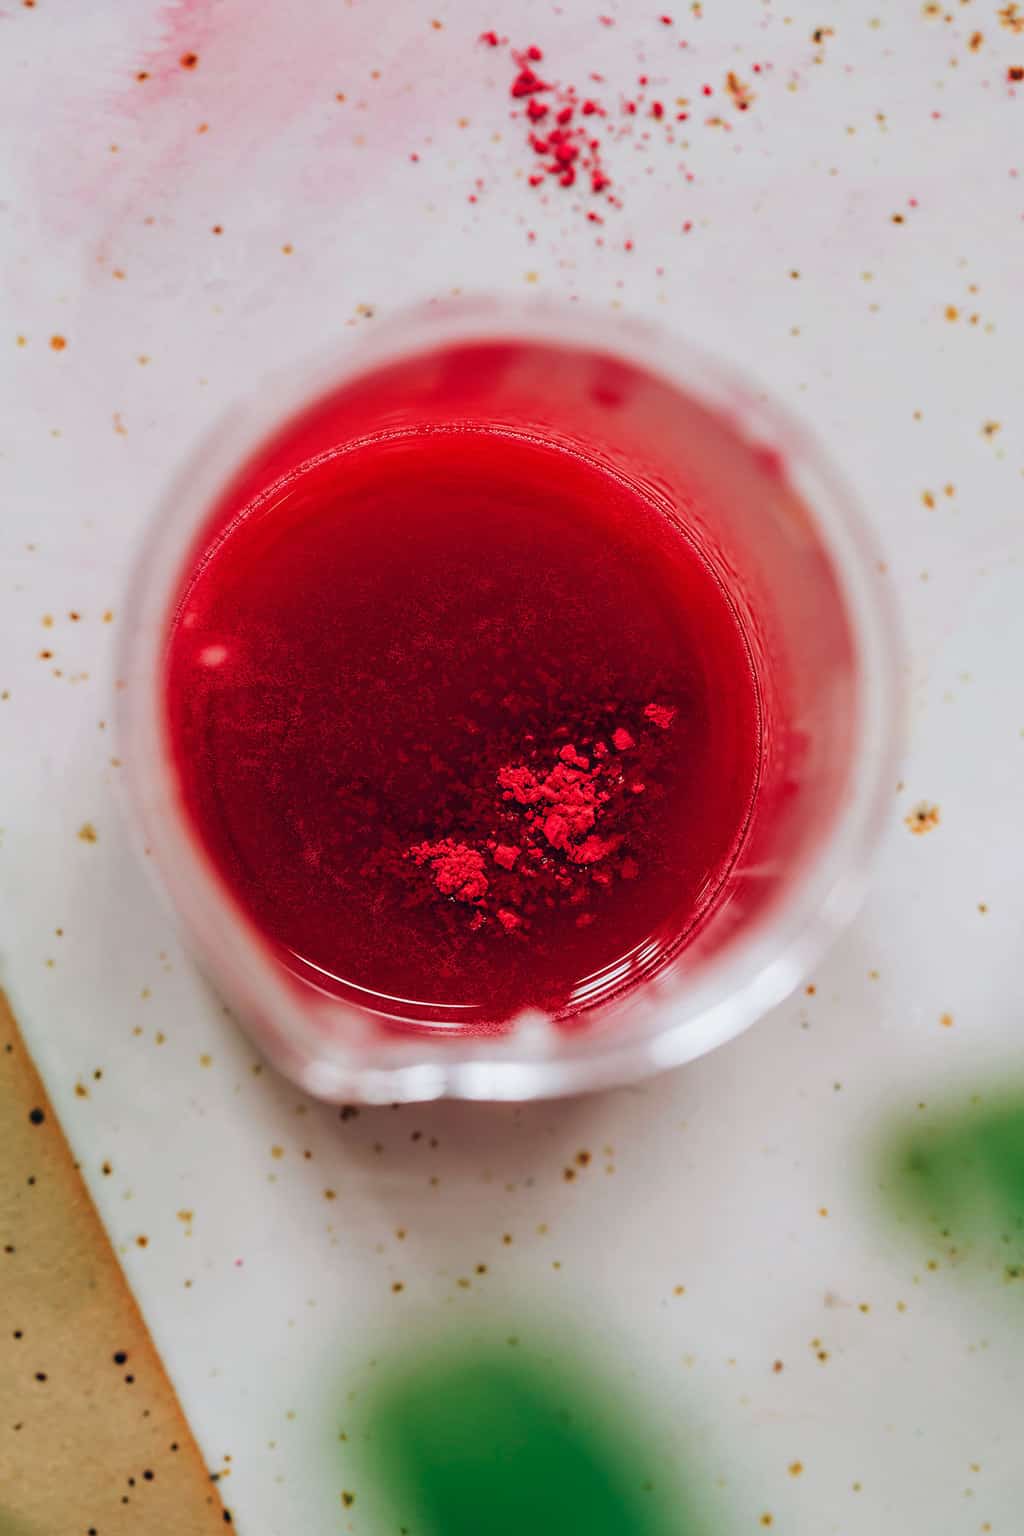 How to make a DIY lip gloss with beet root powder